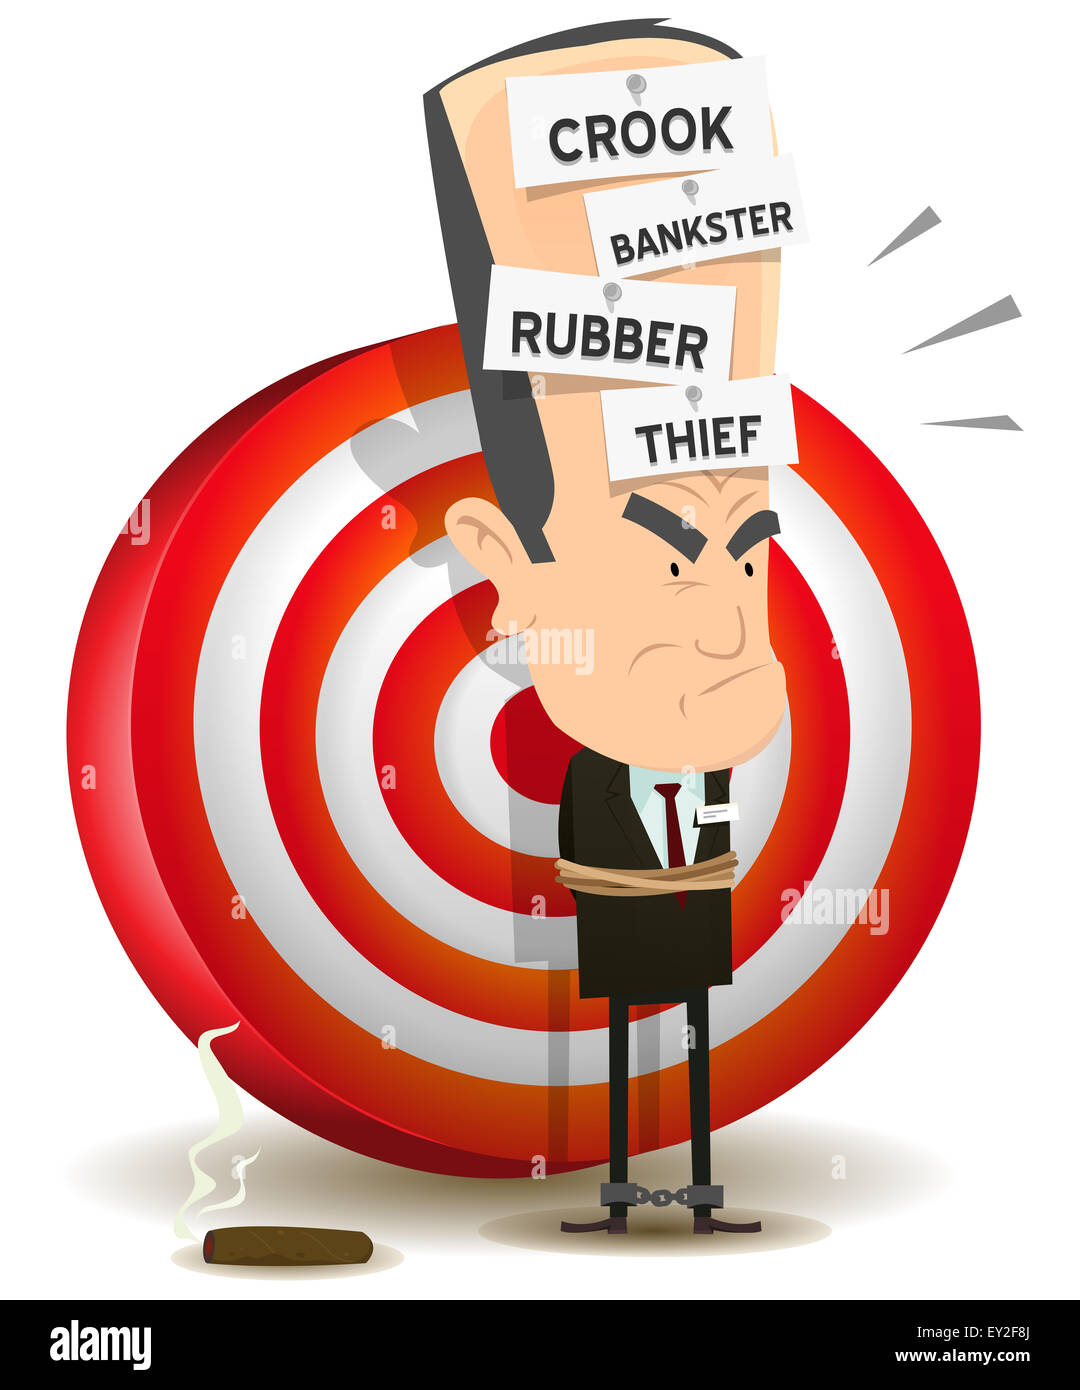 Illustration of a cartoon scenery with bad banker crook leader attached and prisoner with dart target behind Stock Photo